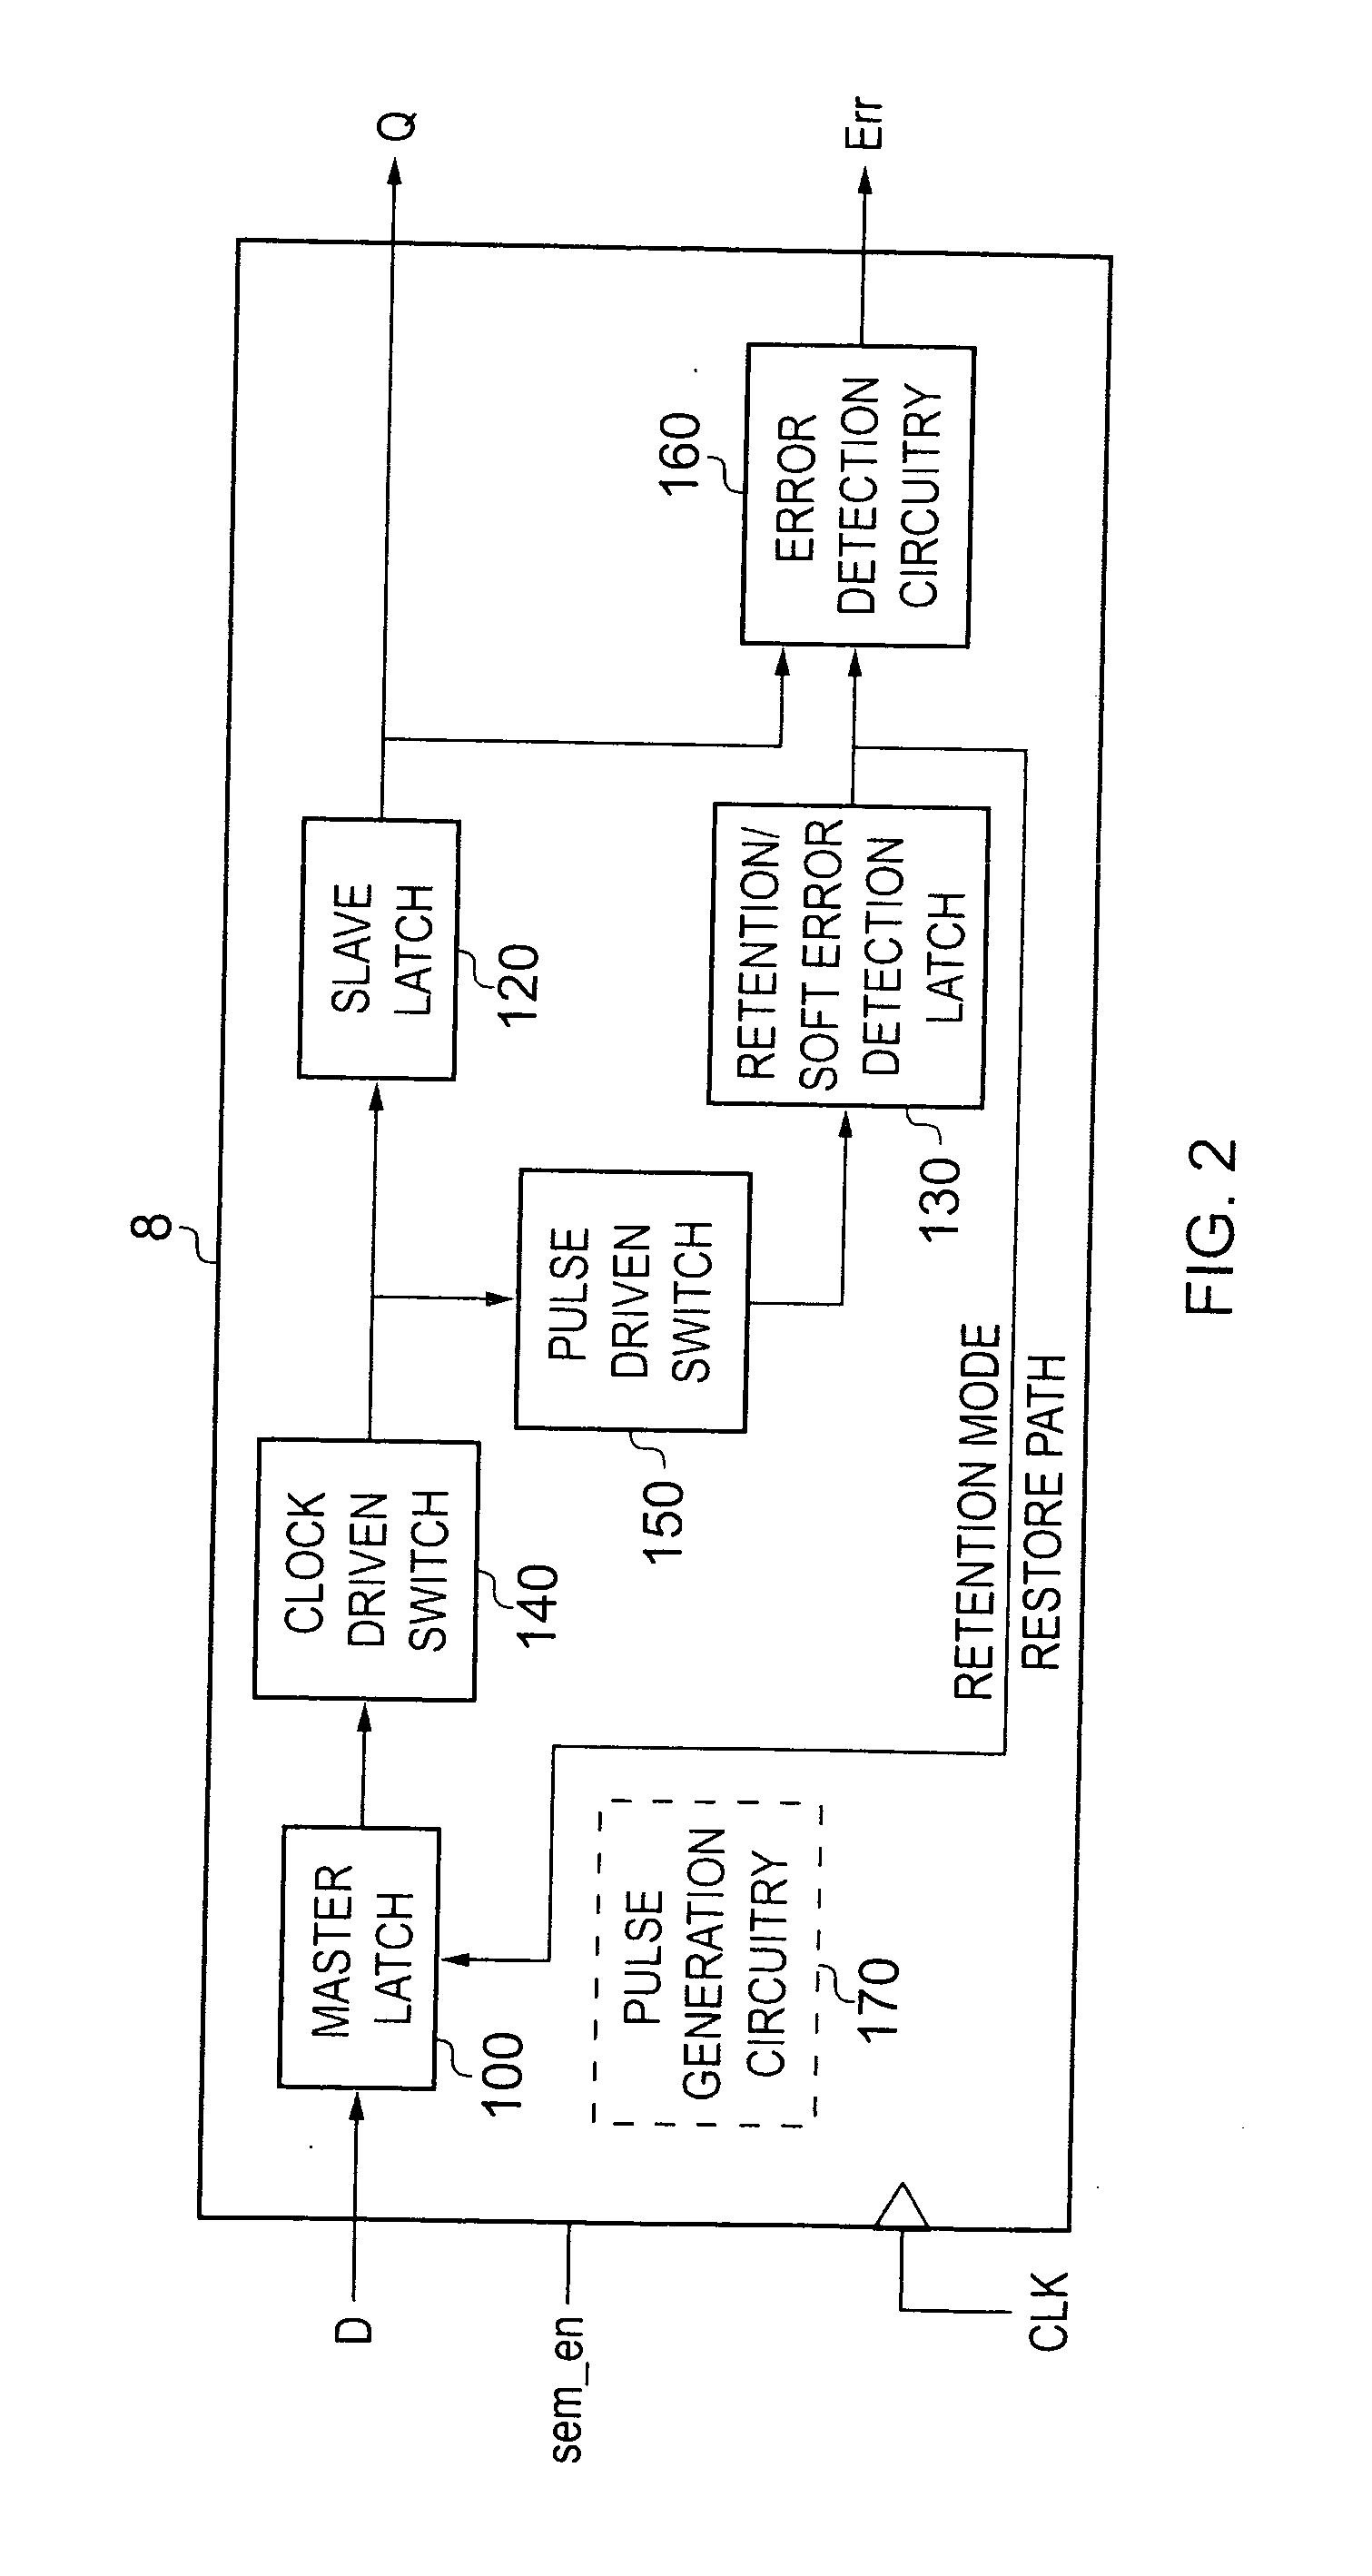 Single Event Upset error detection within sequential storage circuitry of an integrated circuit